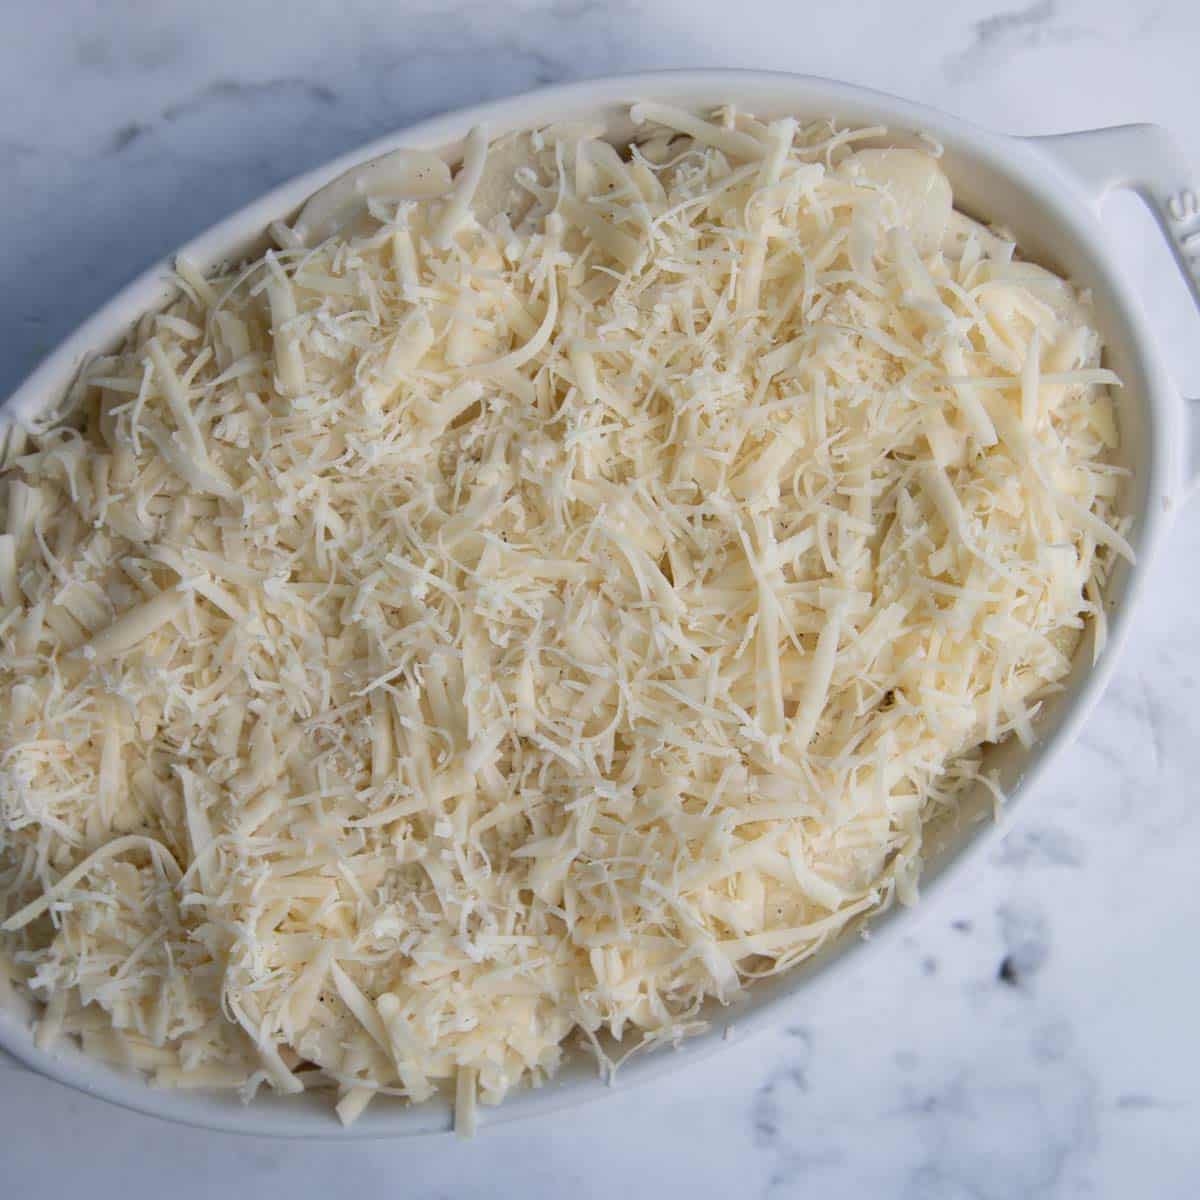 au gratin potatoes layered in a baking dish unbaked.